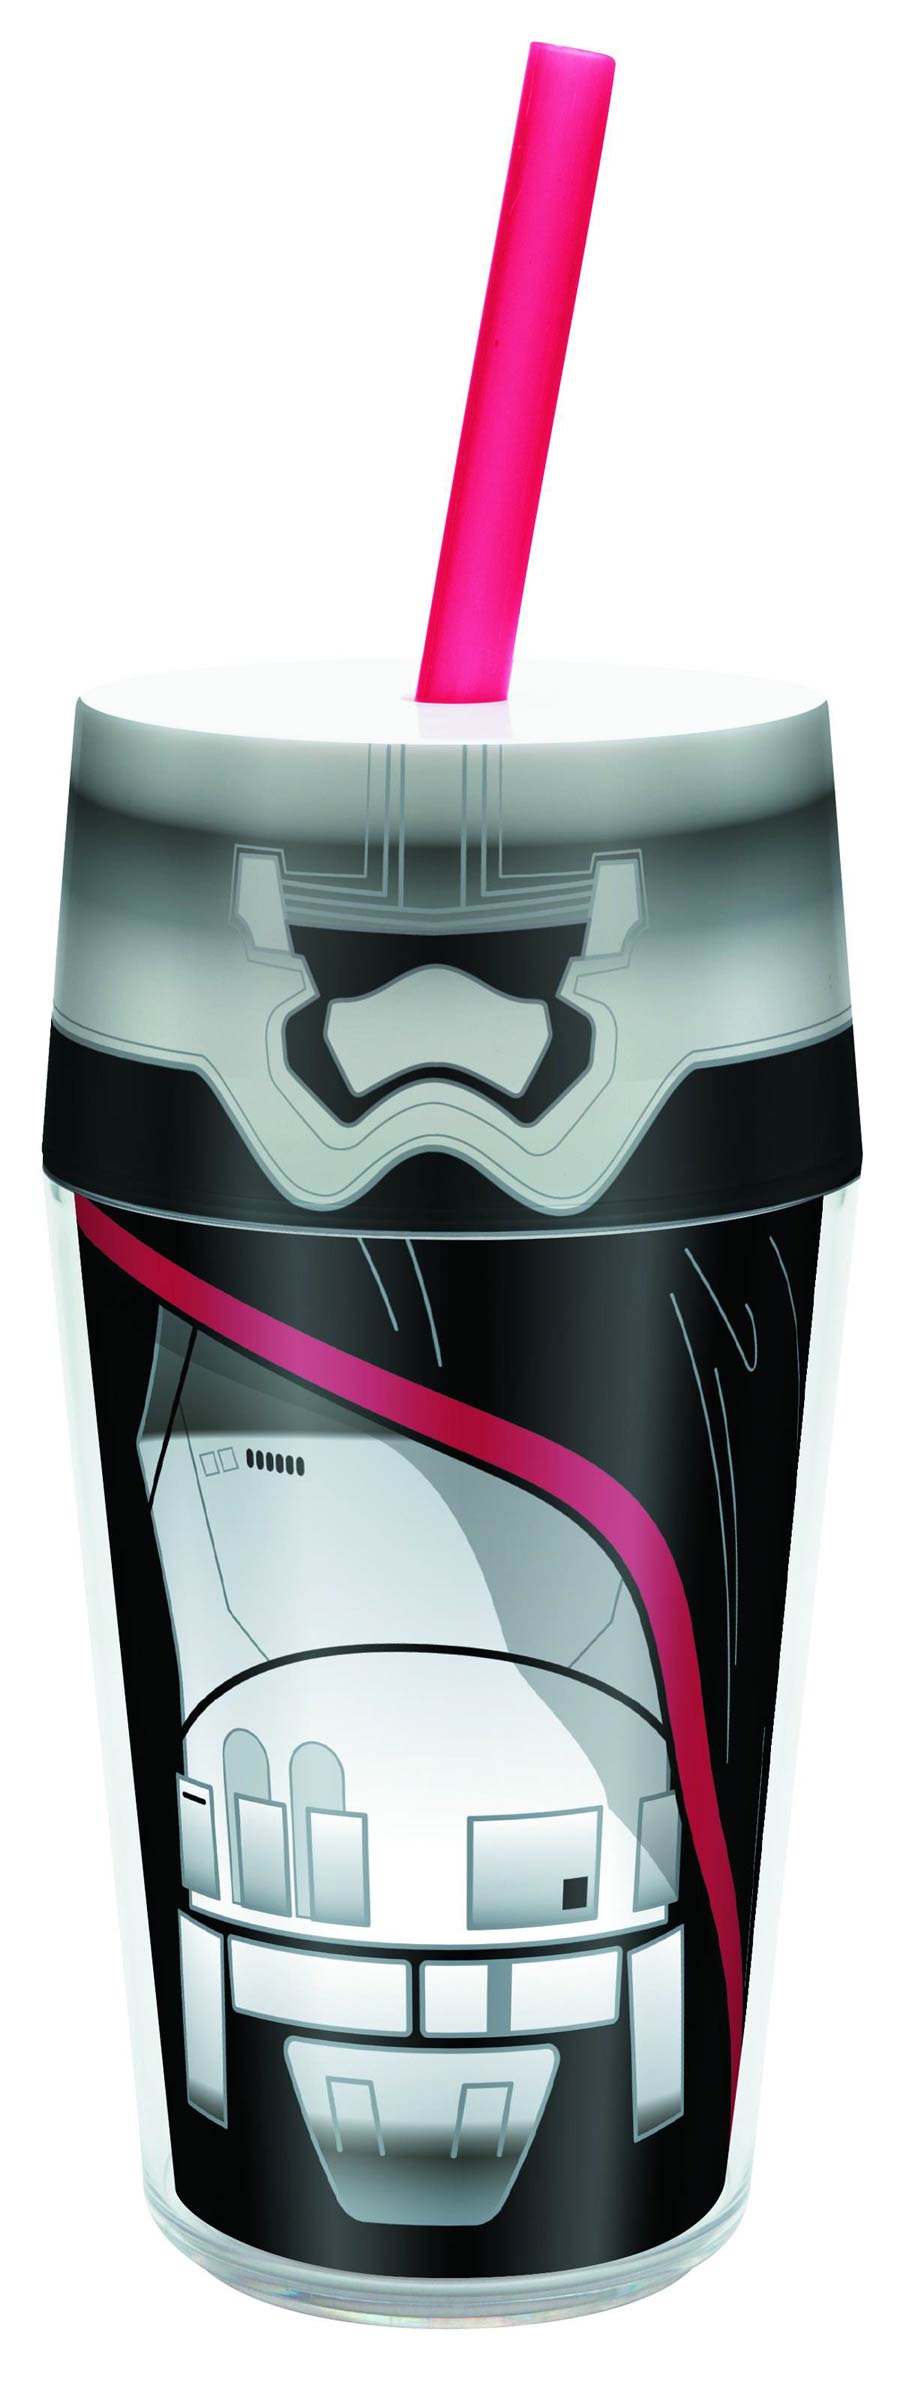 Star Wars Episode VII The Force Awakens 14-Ounce Iconic Tumbler - Stormtrooper